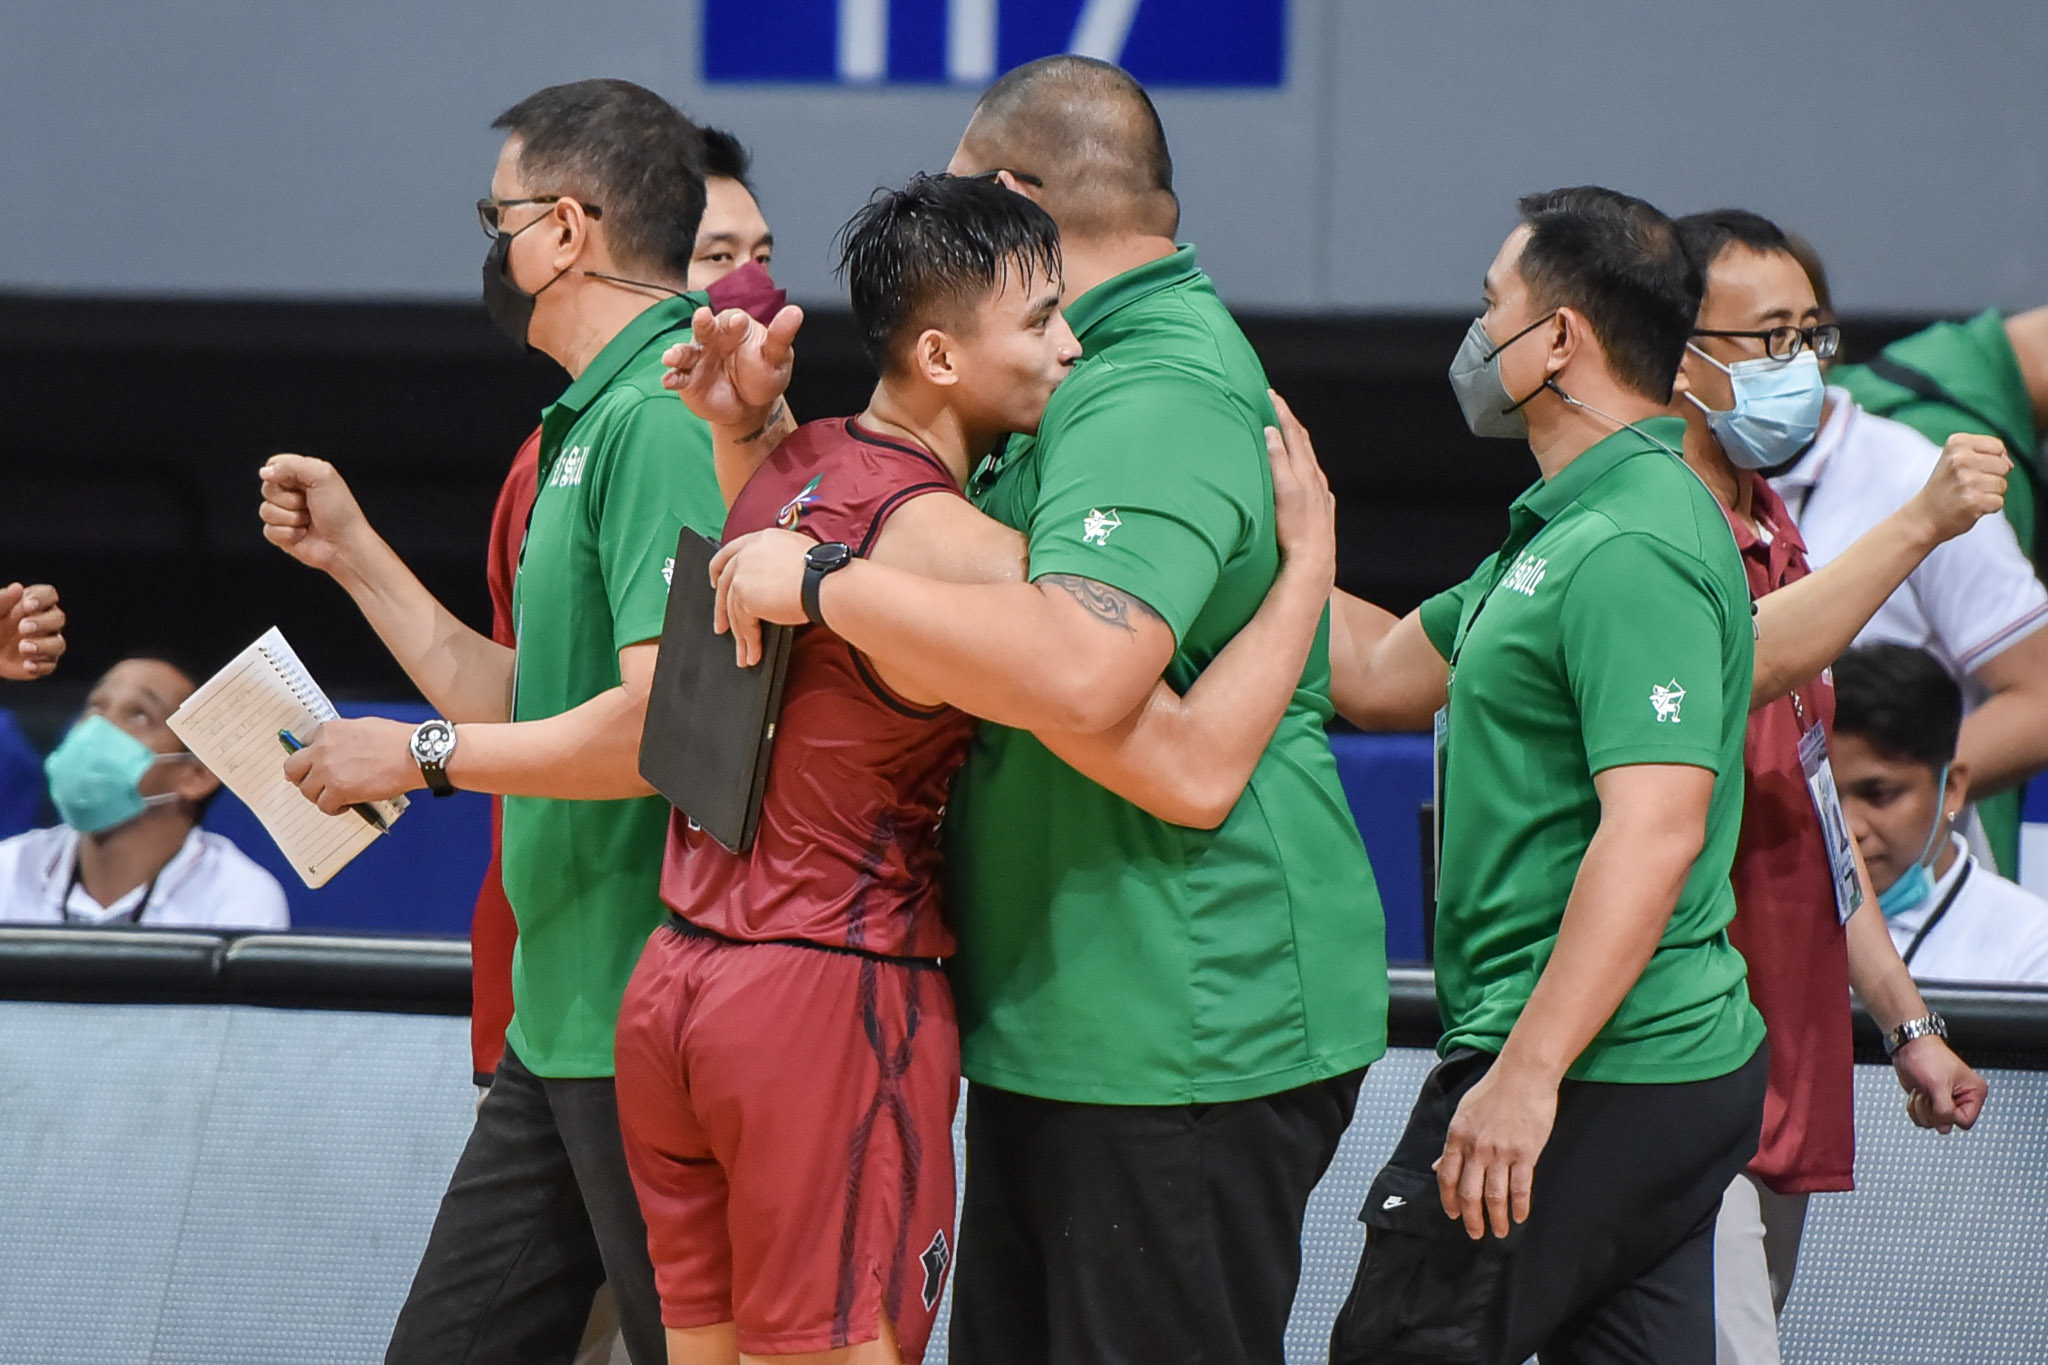 UP Fighting Maroons' Joel Cagulangan greets La Salle coaches after the game. UAAP PHOTO